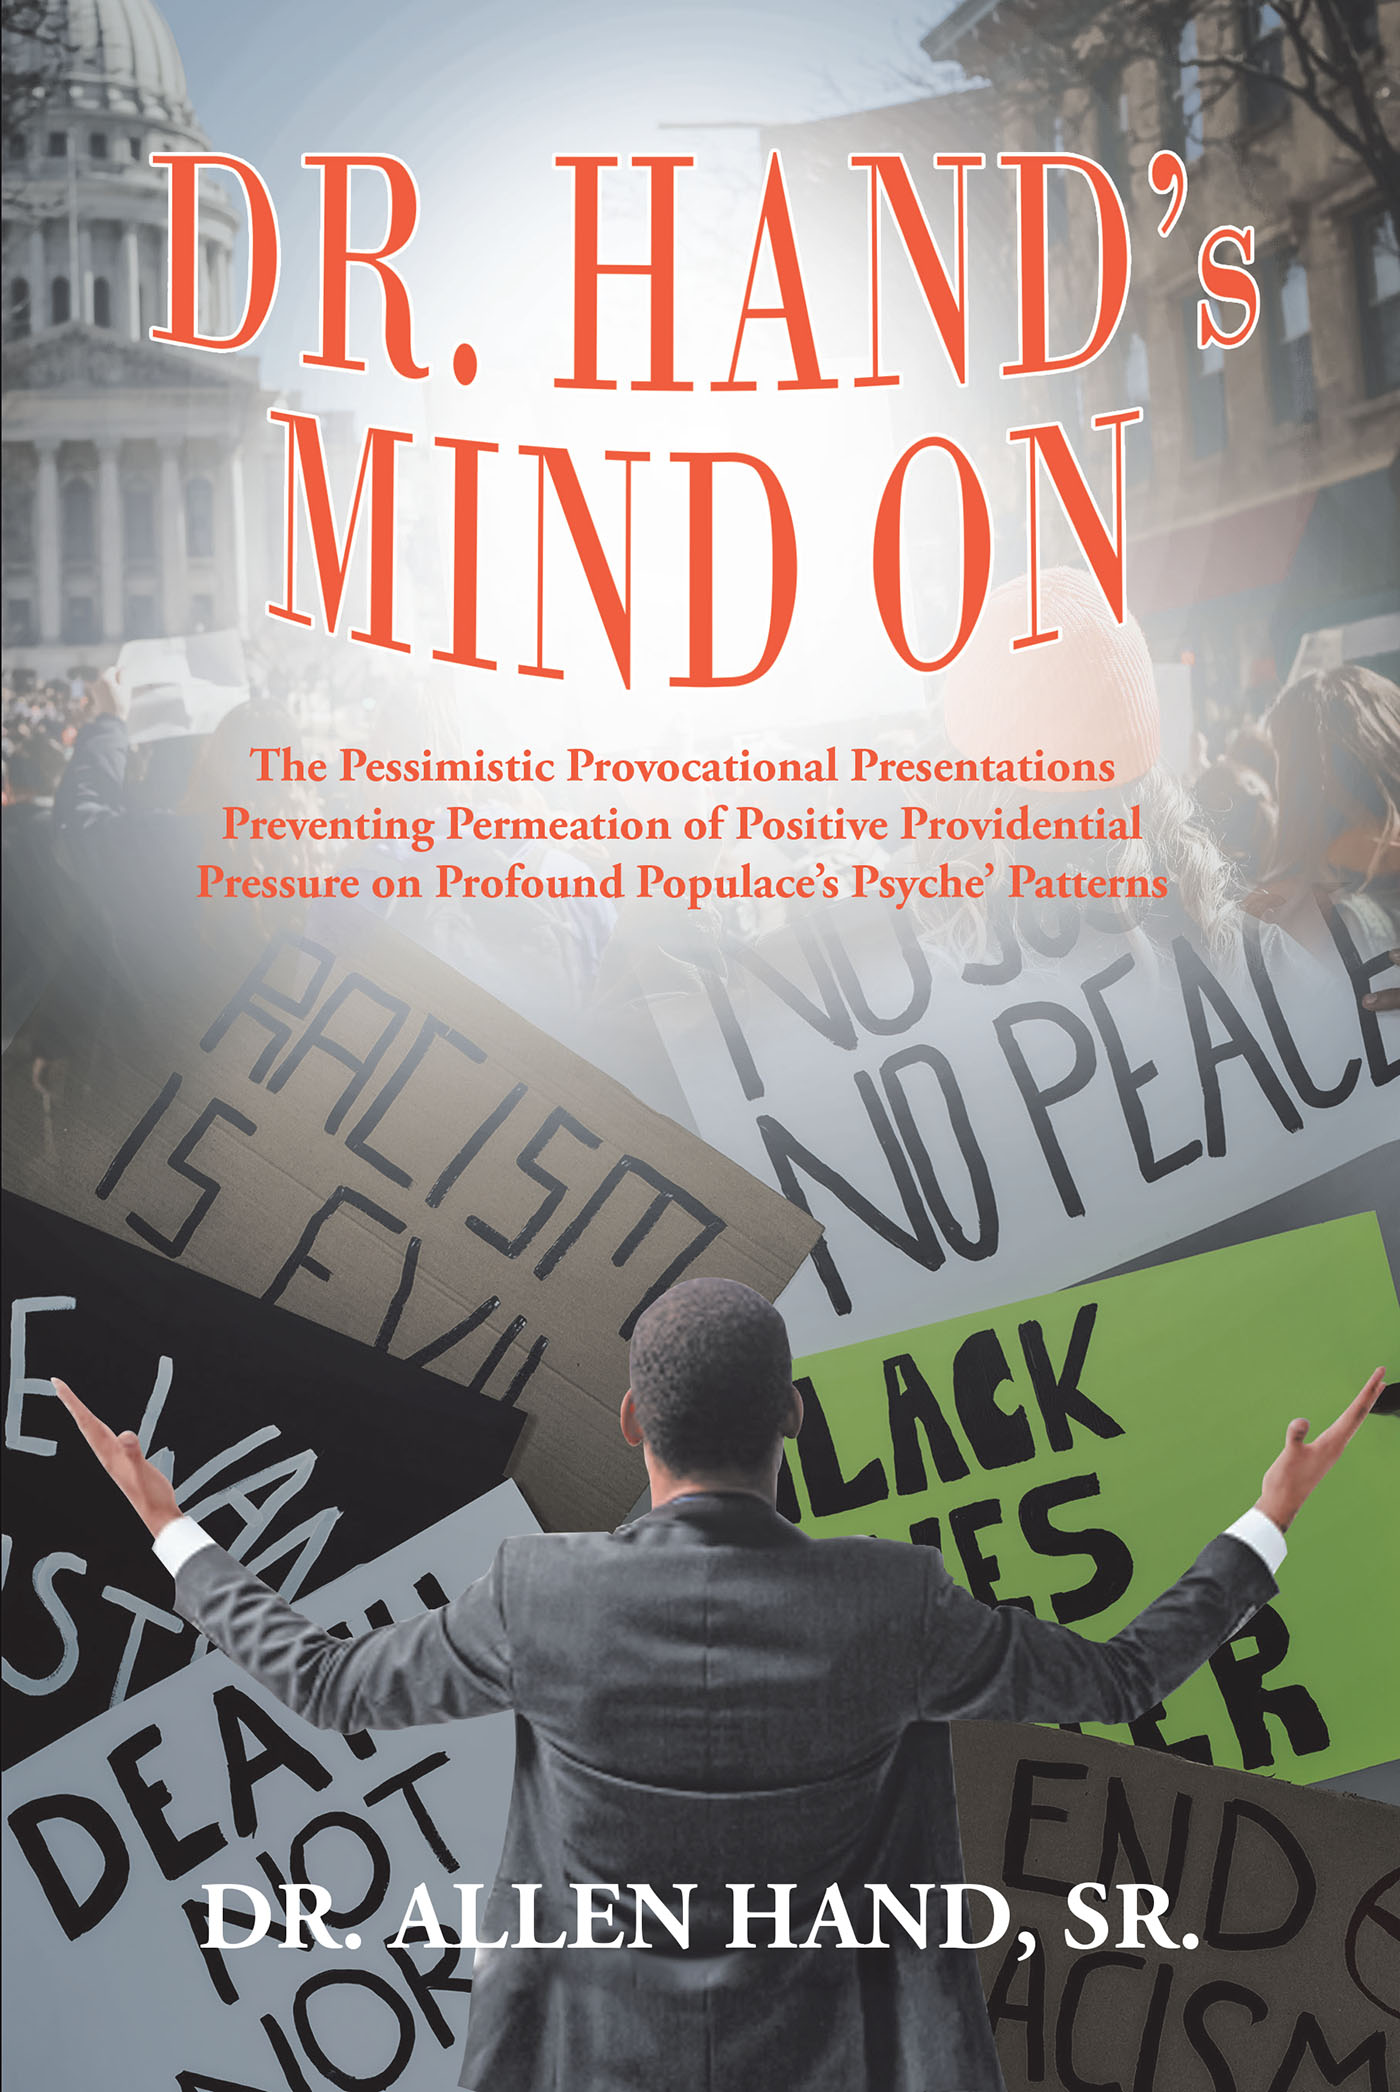 Author Dr. Allen Hand, Sr.’s New Book, "Dr. Hand's Mind On," is a Poignant Discussion on Blocking Out Media That Misrepresents God's Teachings Through Prayers and Faith